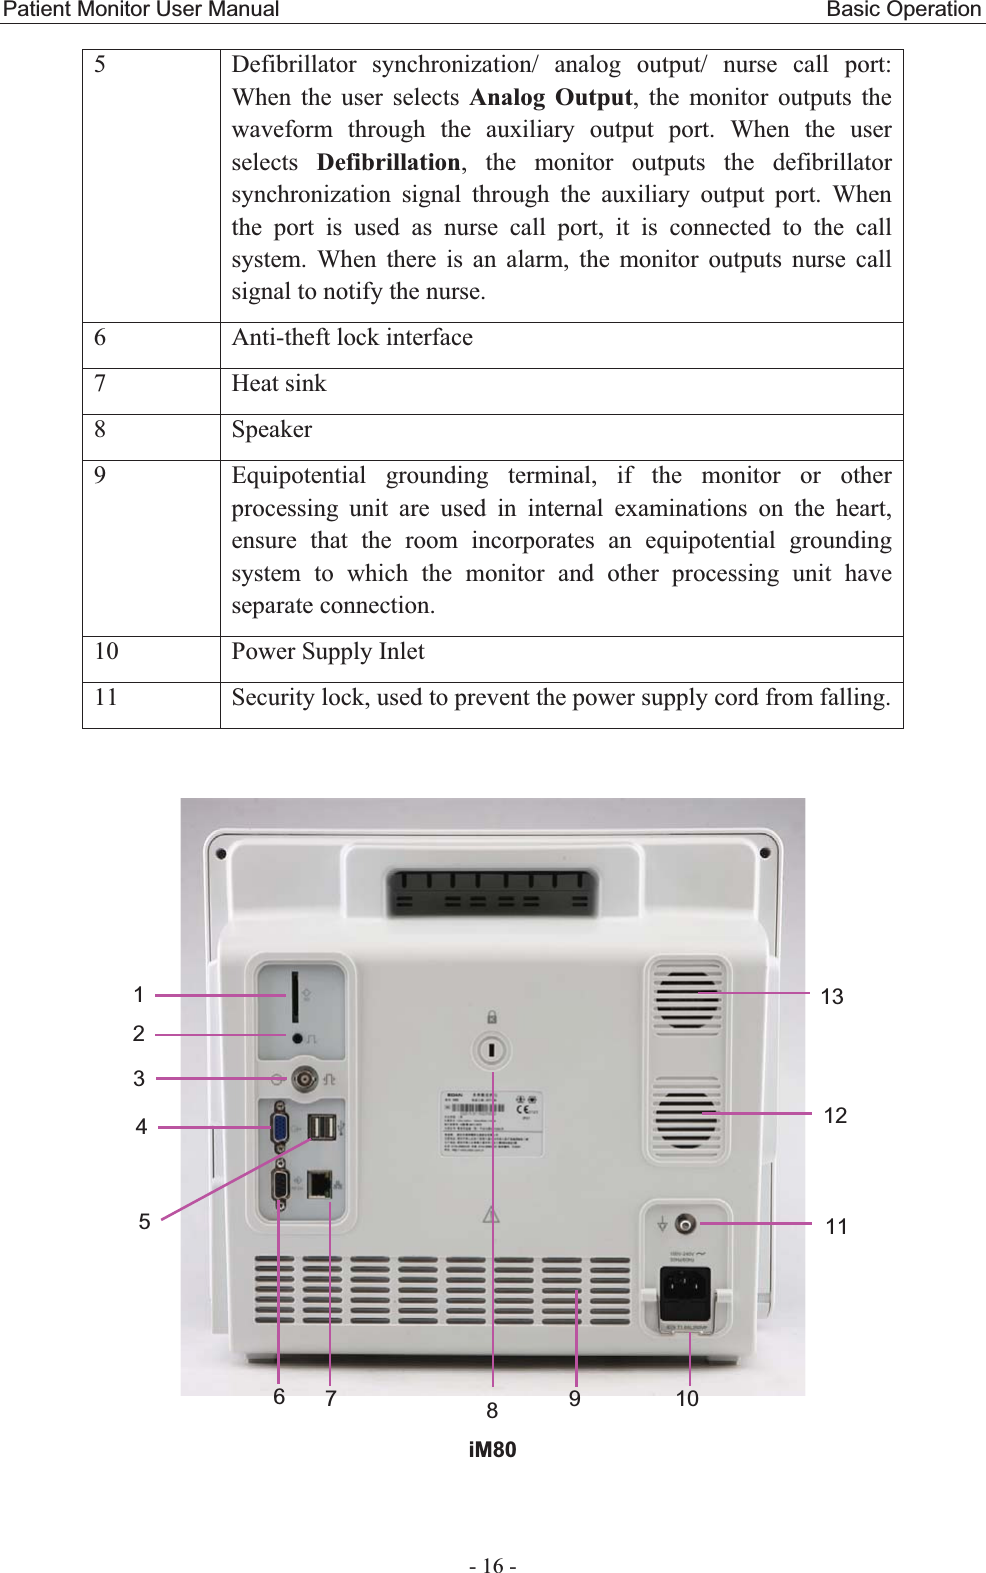 Patient Monitor User Manual                                                  Basic Operation  - 16 - 5  Defibrillator synchronization/ analog output/ nurse call port: When the user selects Analog Output, the monitor outputs the waveform through the auxiliary output port. When the user selects  Defibrillation, the monitor outputs the defibrillator synchronization signal through the auxiliary output port. When the port is used as nurse call port, it is connected to the call system. When there is an alarm, the monitor outputs nurse call signal to notify the nurse. 6  Anti-theft lock interface 7 Heat sink 8 Speaker 9  Equipotential grounding terminal, if the monitor or other processing unit are used in internal examinations on the heart, ensure that the room incorporates an equipotential grounding system to which the monitor and other processing unit have separate connection. 10  Power Supply Inlet 11  Security lock, used to prevent the power supply cord from falling.   iM8012345678910111213